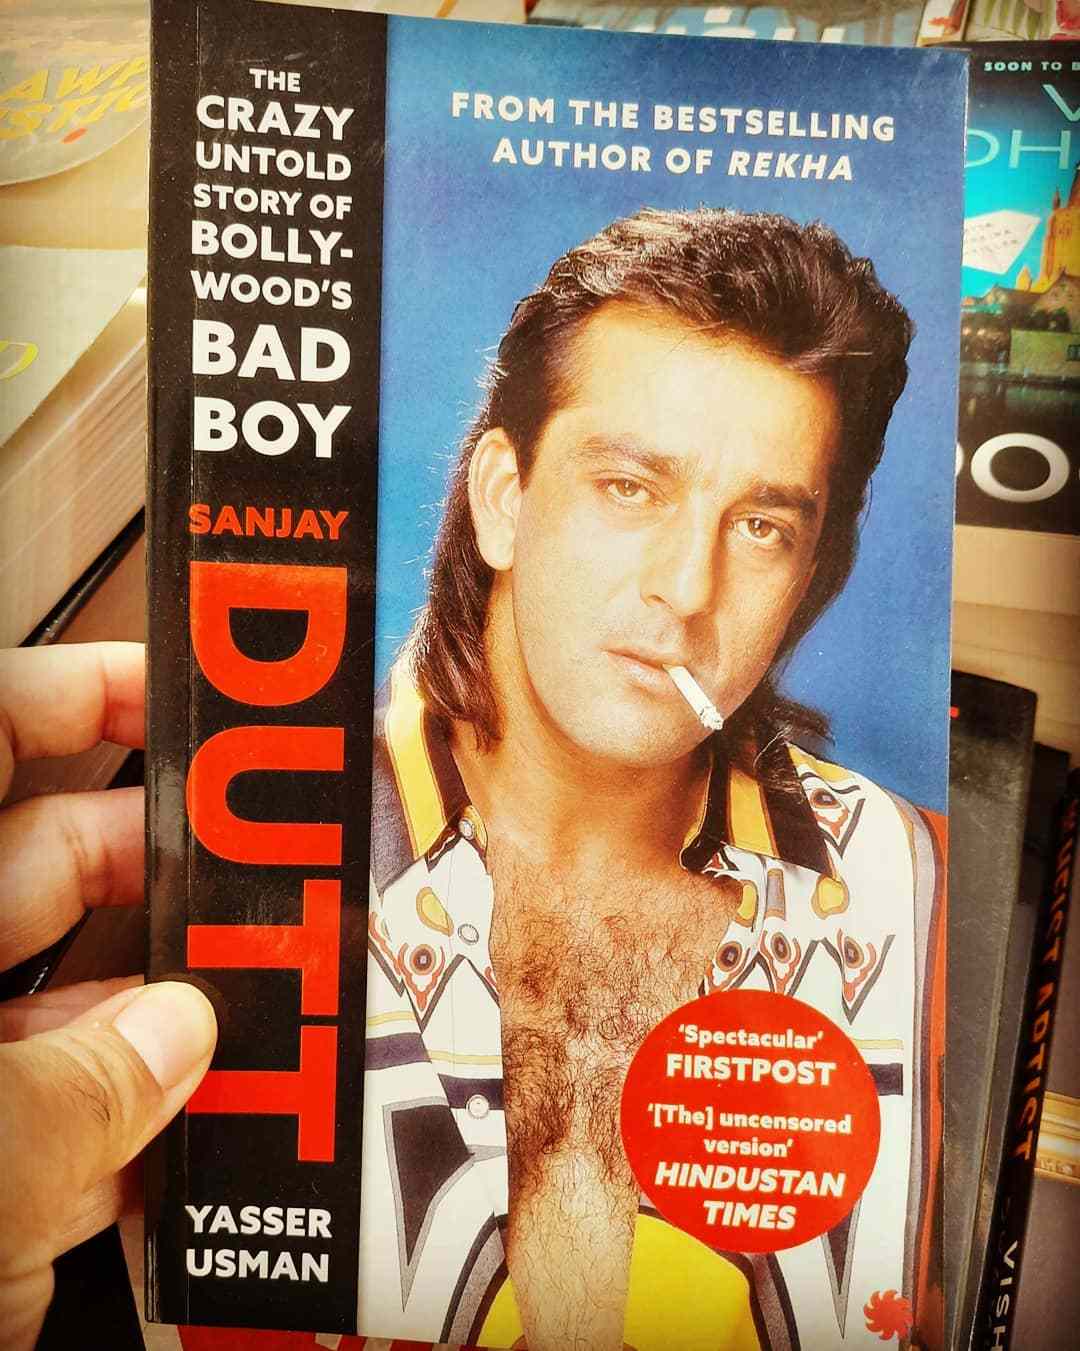 Cover of Sanjay Dutt's biography by Yasser Usman